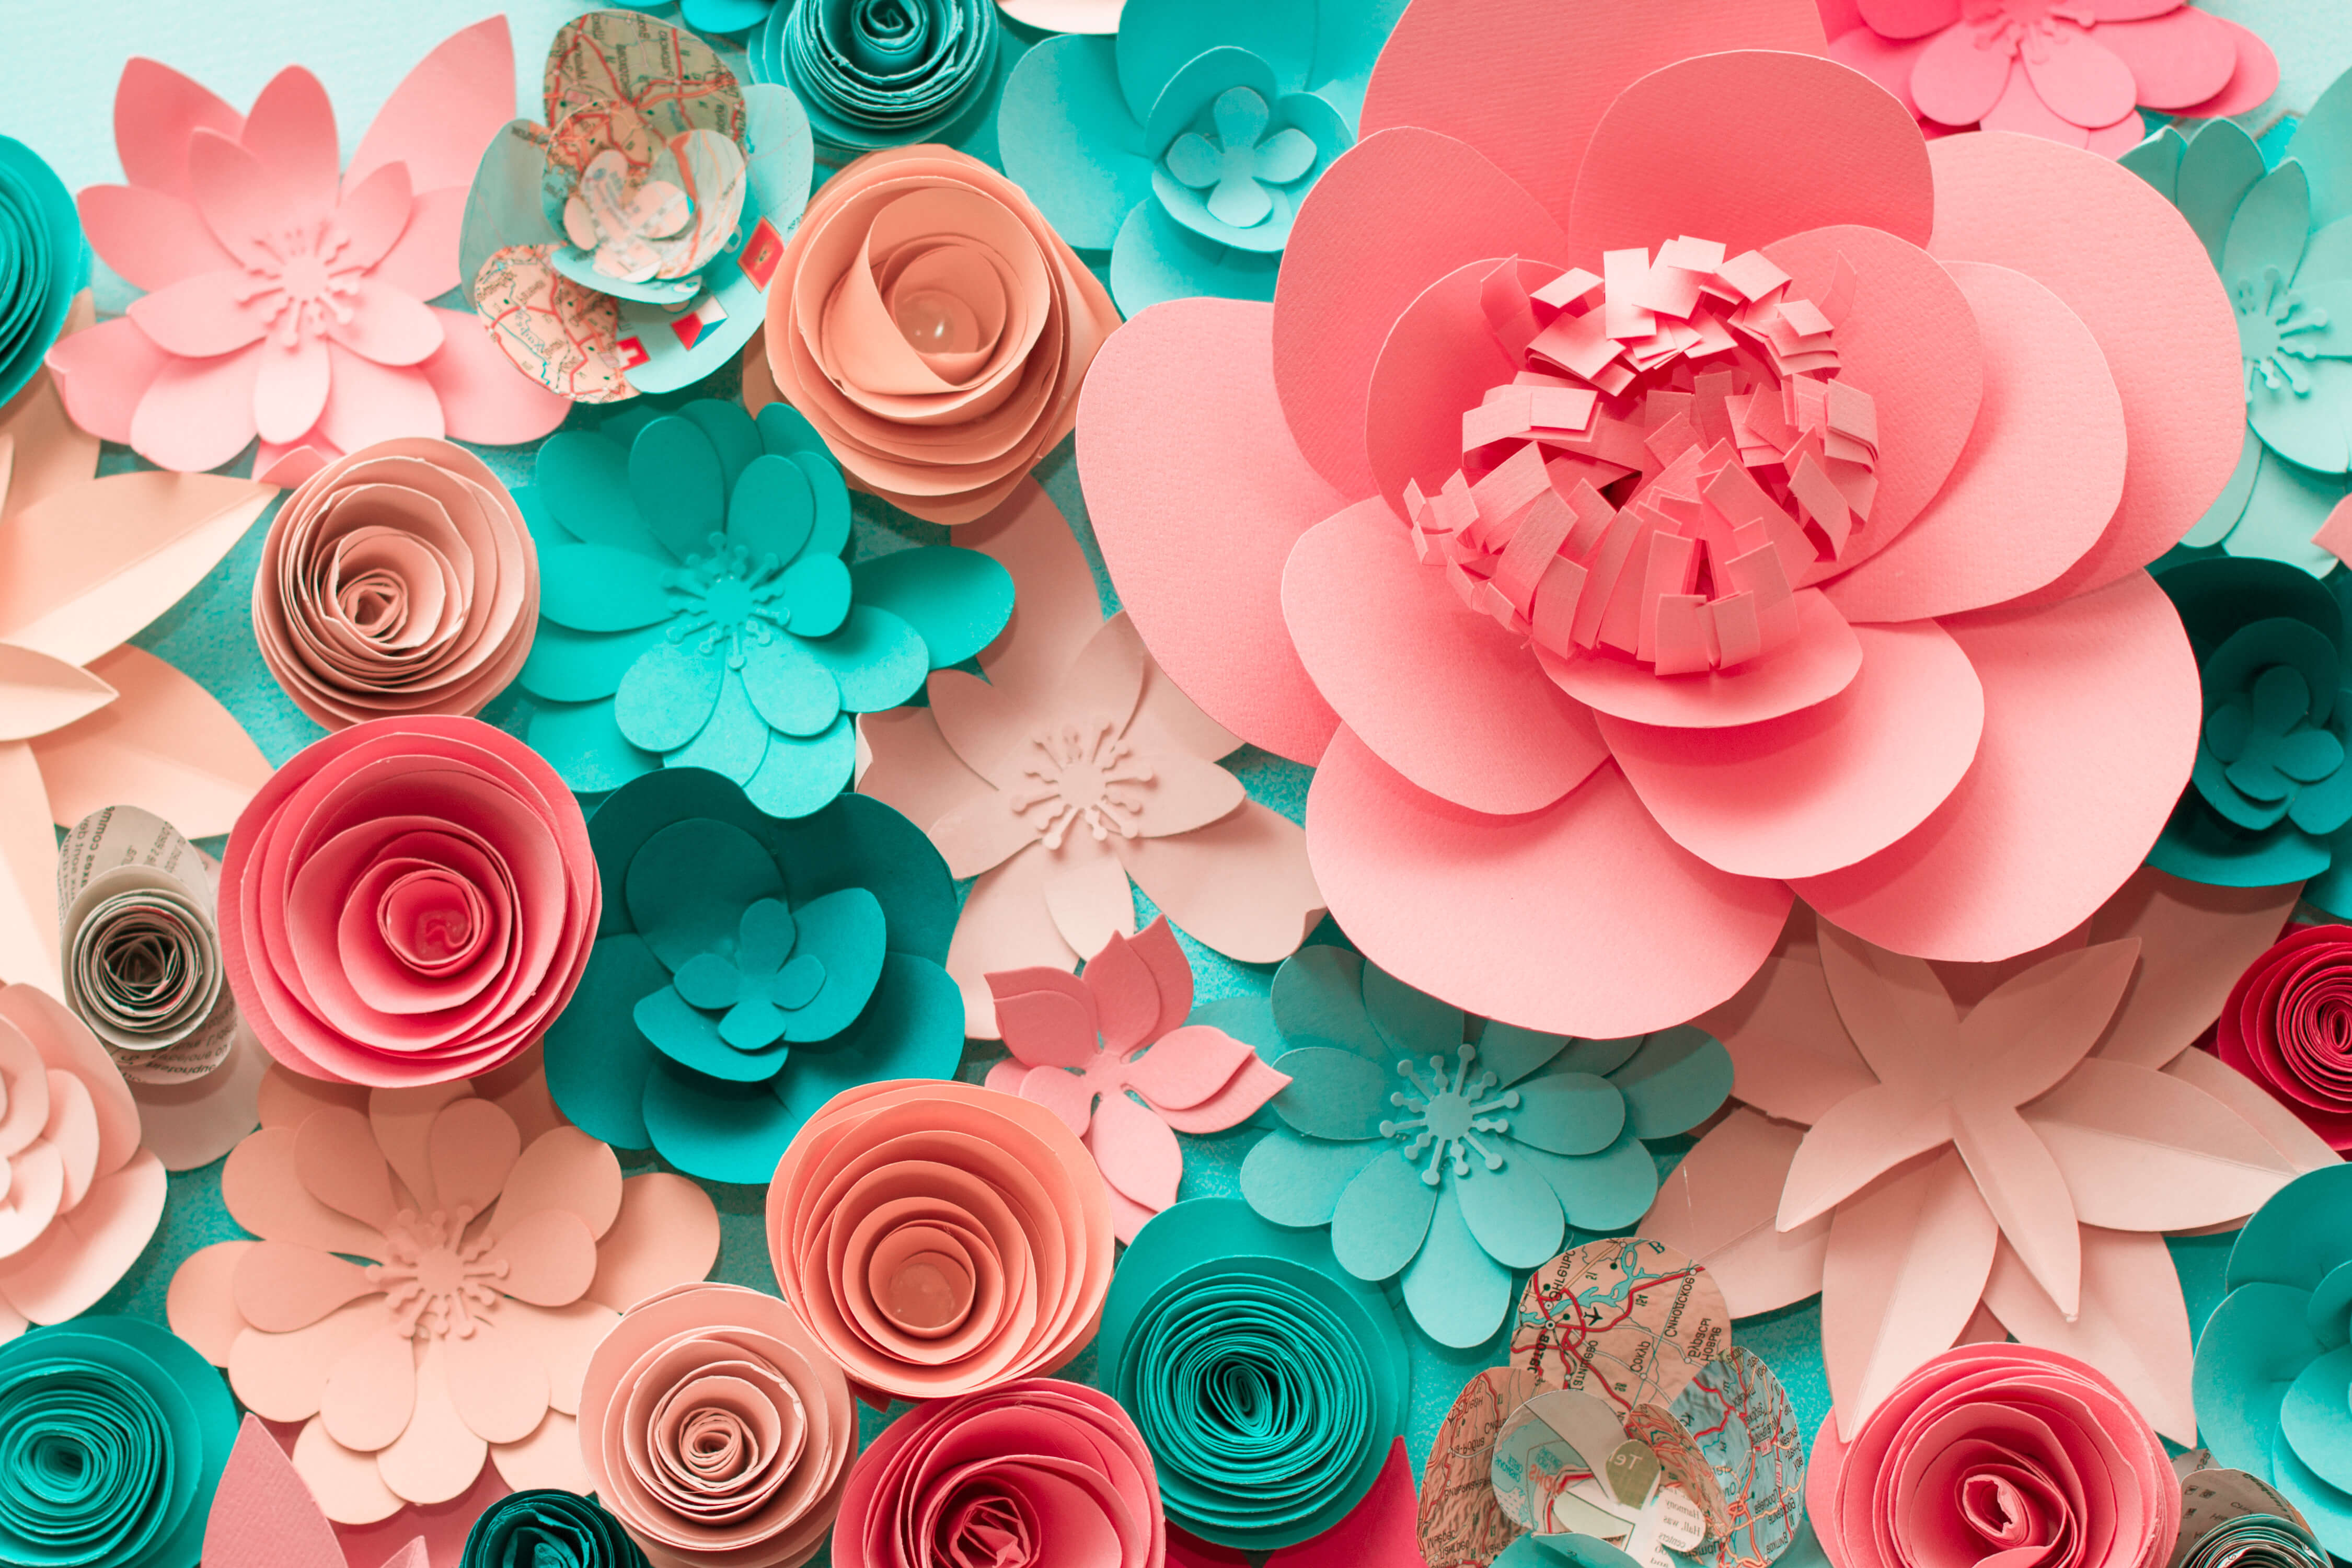 A collection of many different paper flowers in different styles. The pink, coral, and teal colored paper flowers are arranged on a table, and the image is an overhead angle looking down.